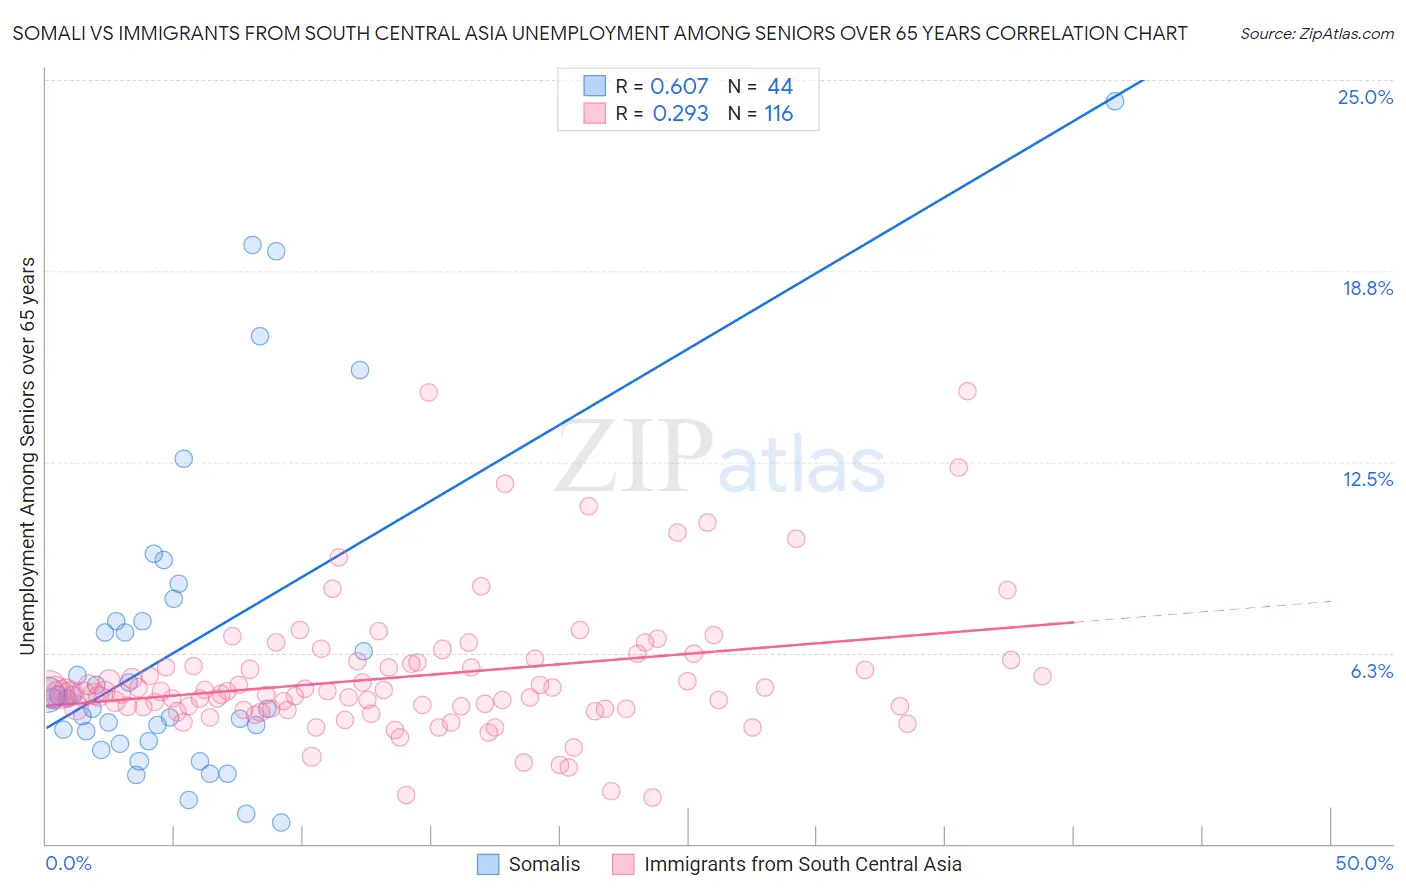 Somali vs Immigrants from South Central Asia Unemployment Among Seniors over 65 years